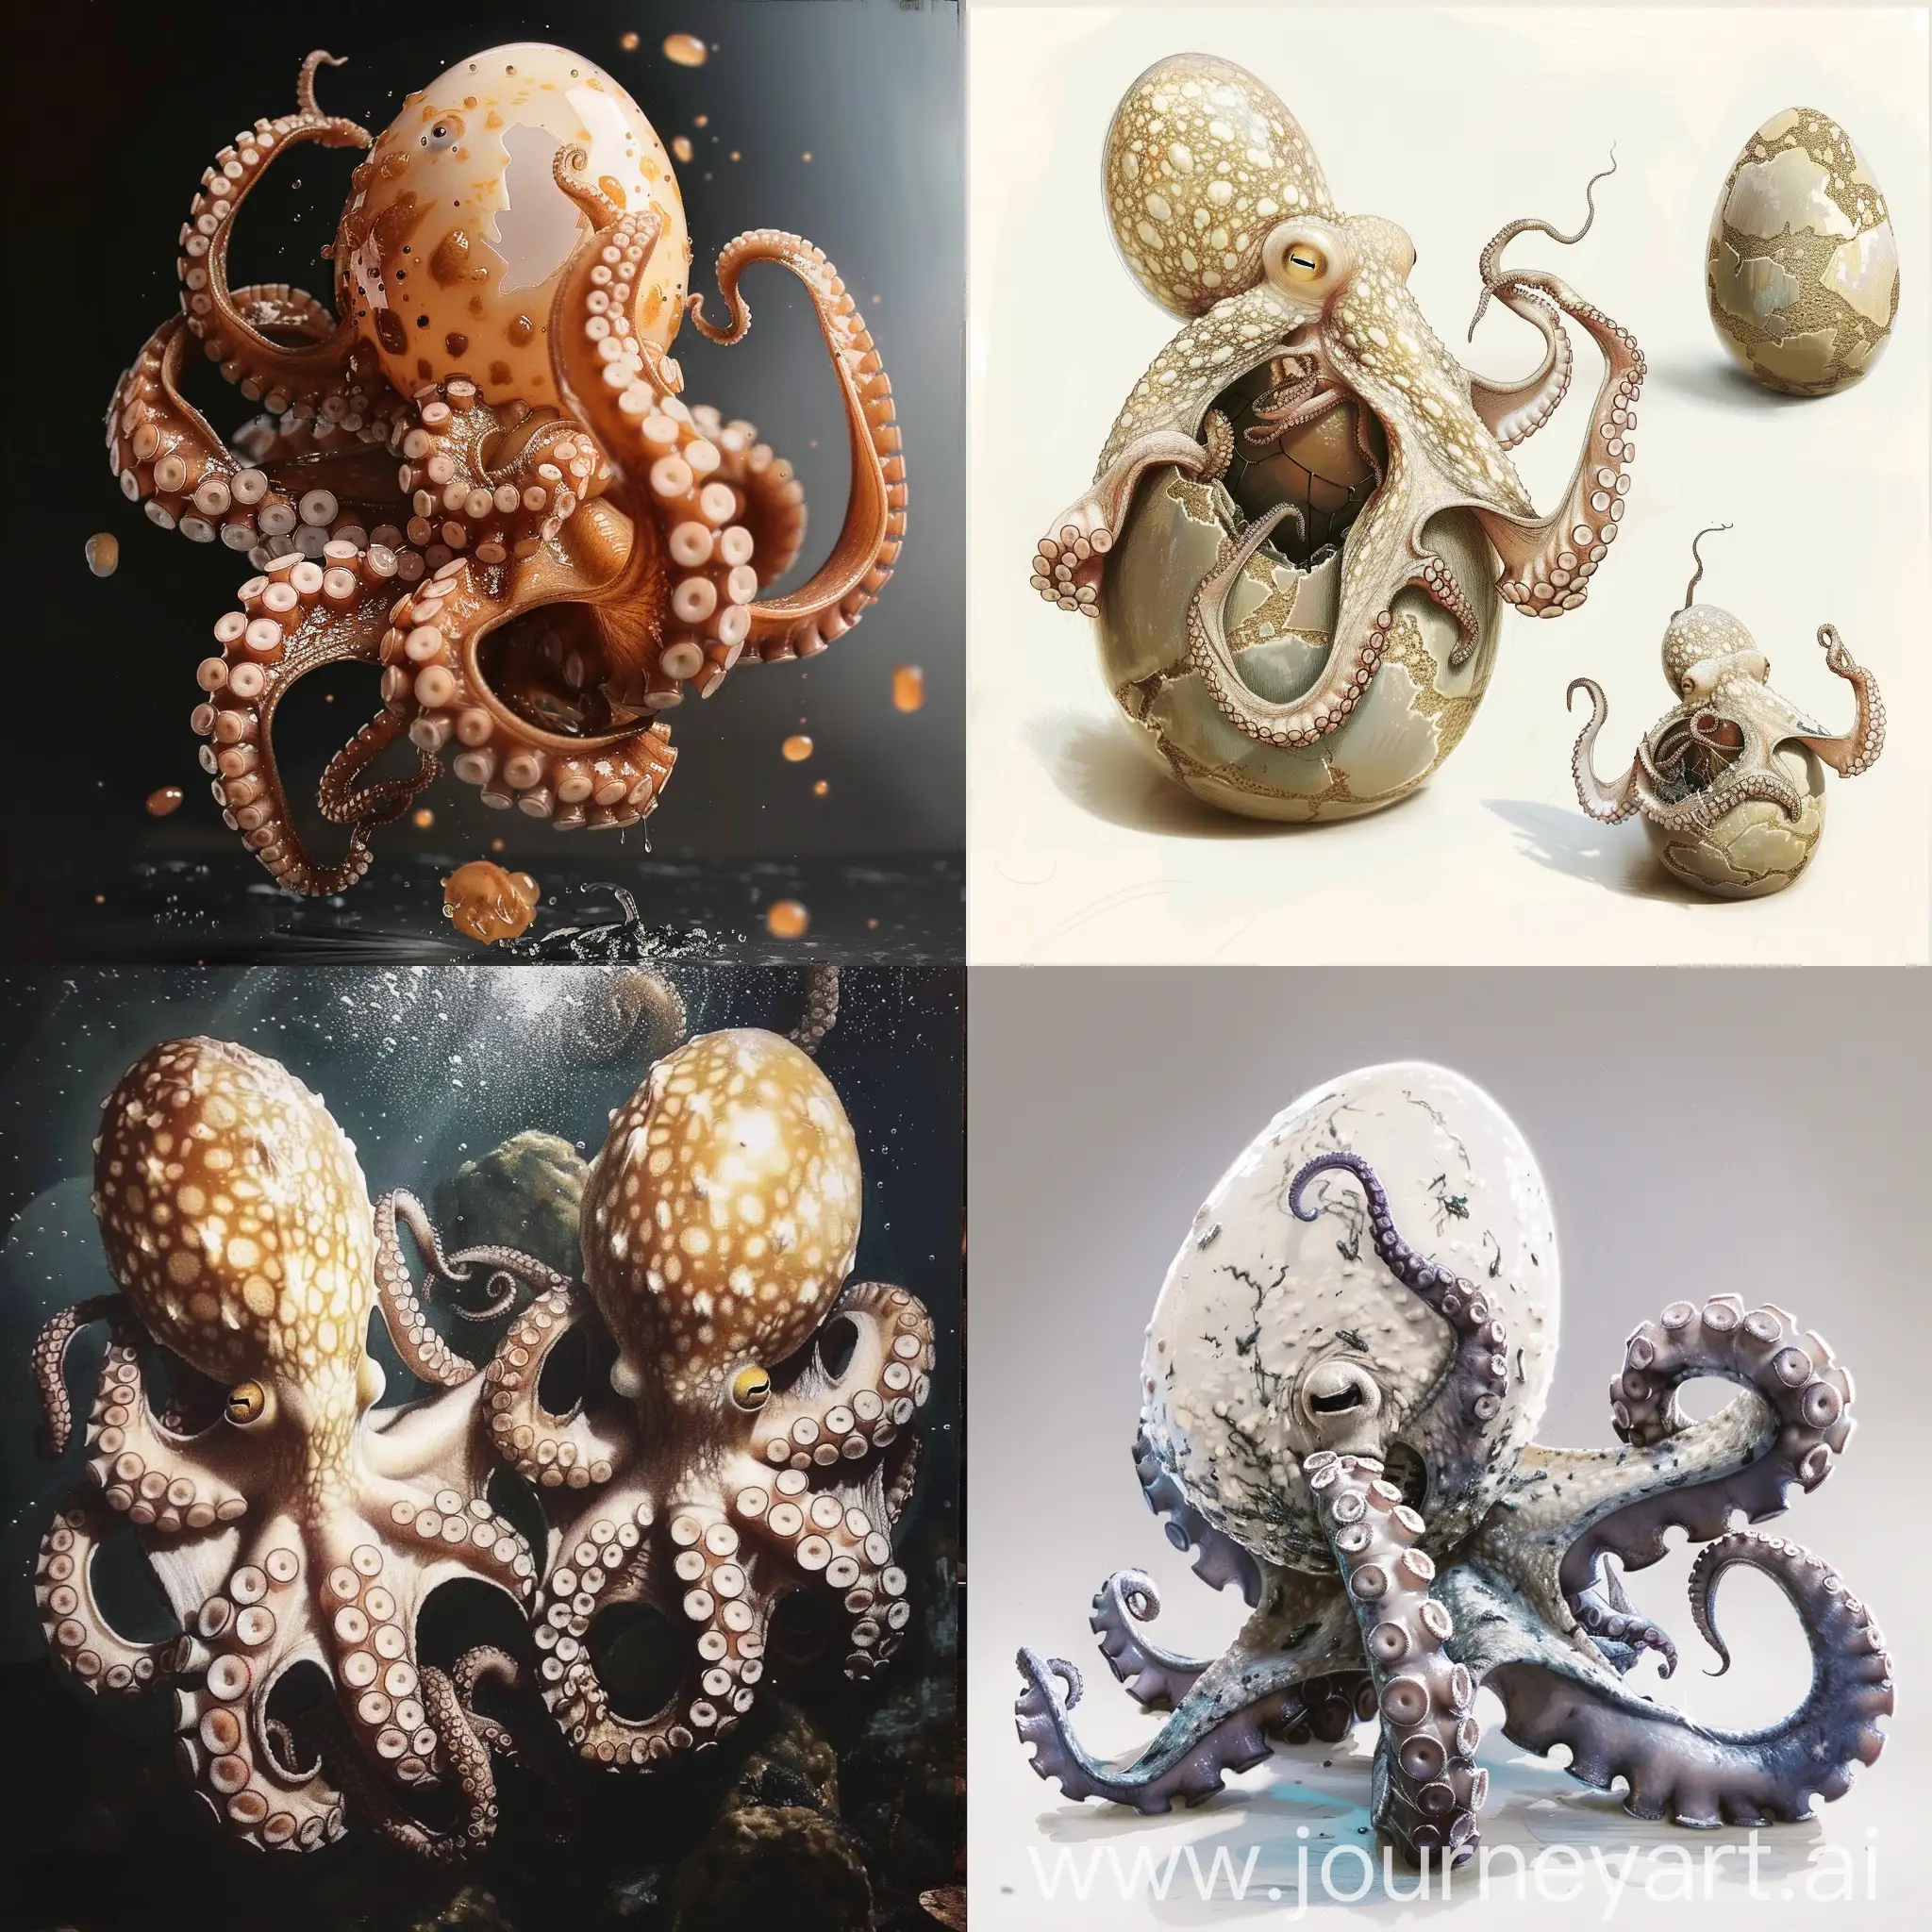 Octopus-Egg-Hatching-Process-in-Photorealistic-Art